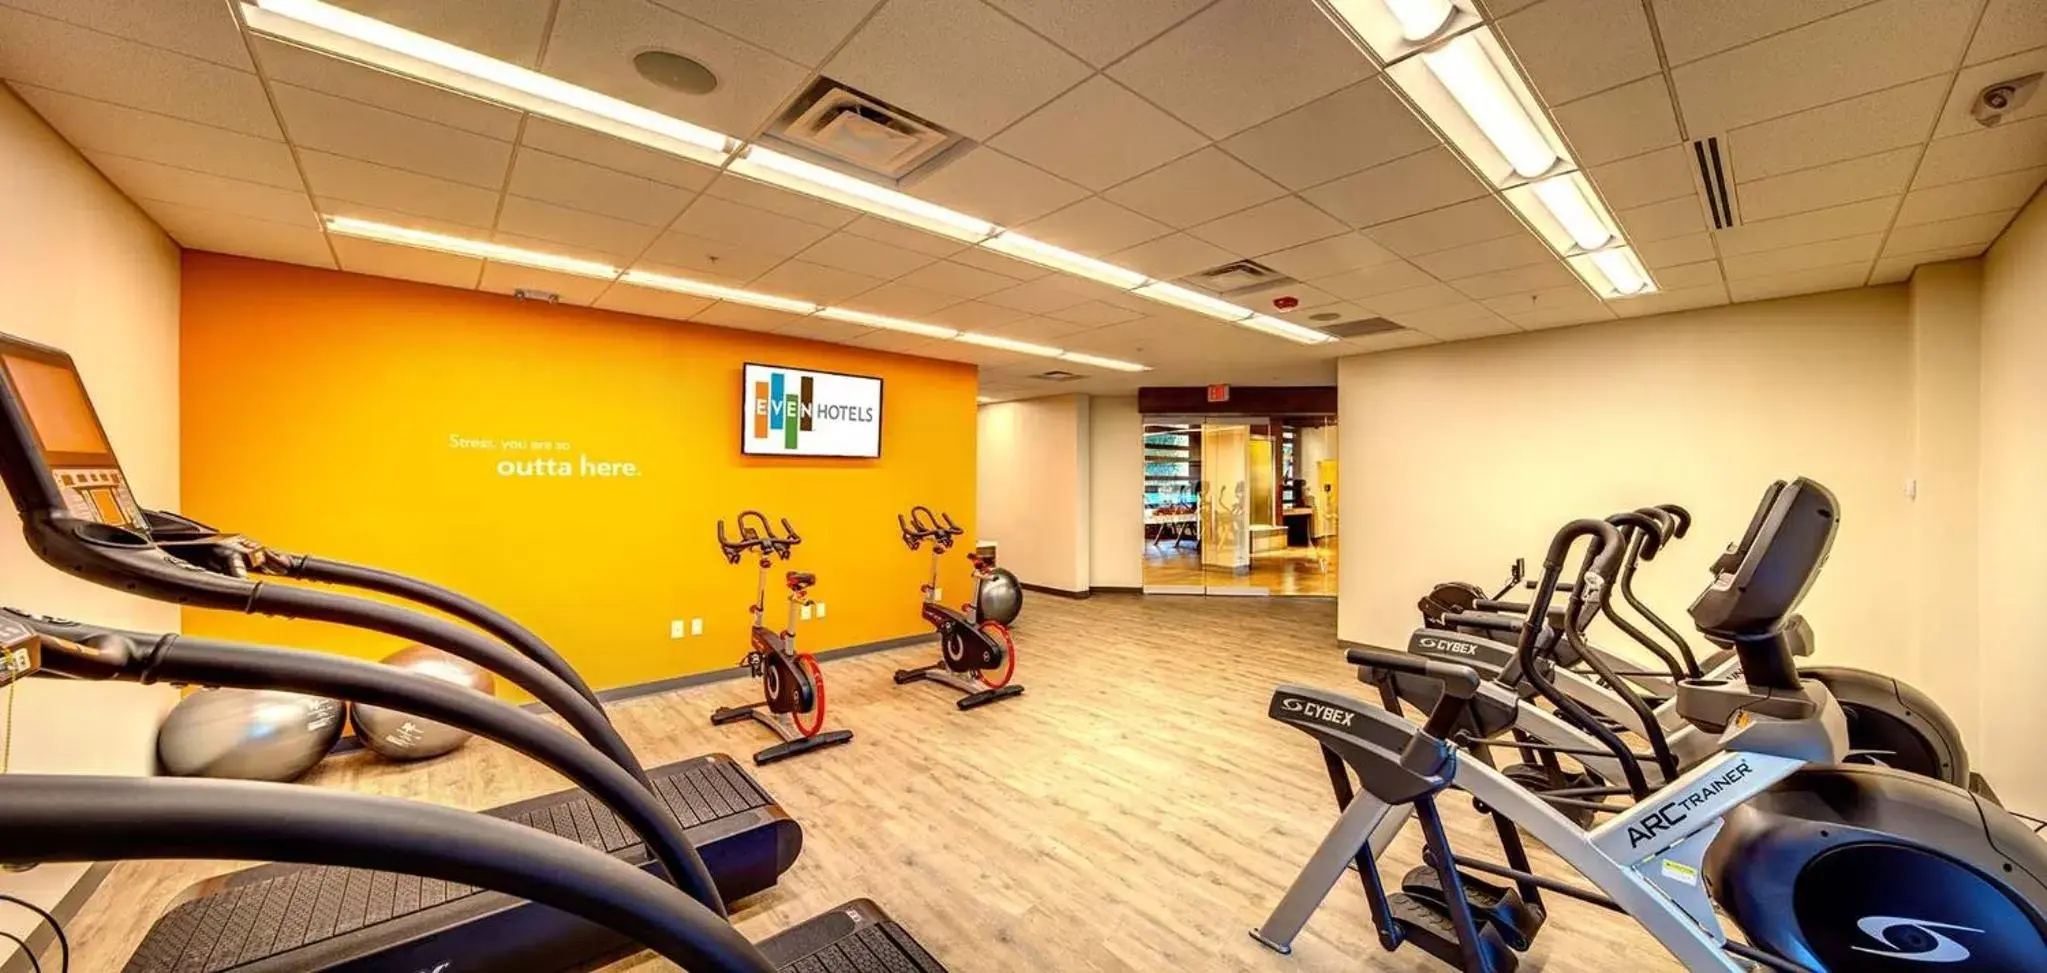 Fitness centre/facilities, Fitness Center/Facilities in EVEN Hotels Sarasota-Lakewood Ranch, an IHG Hotel